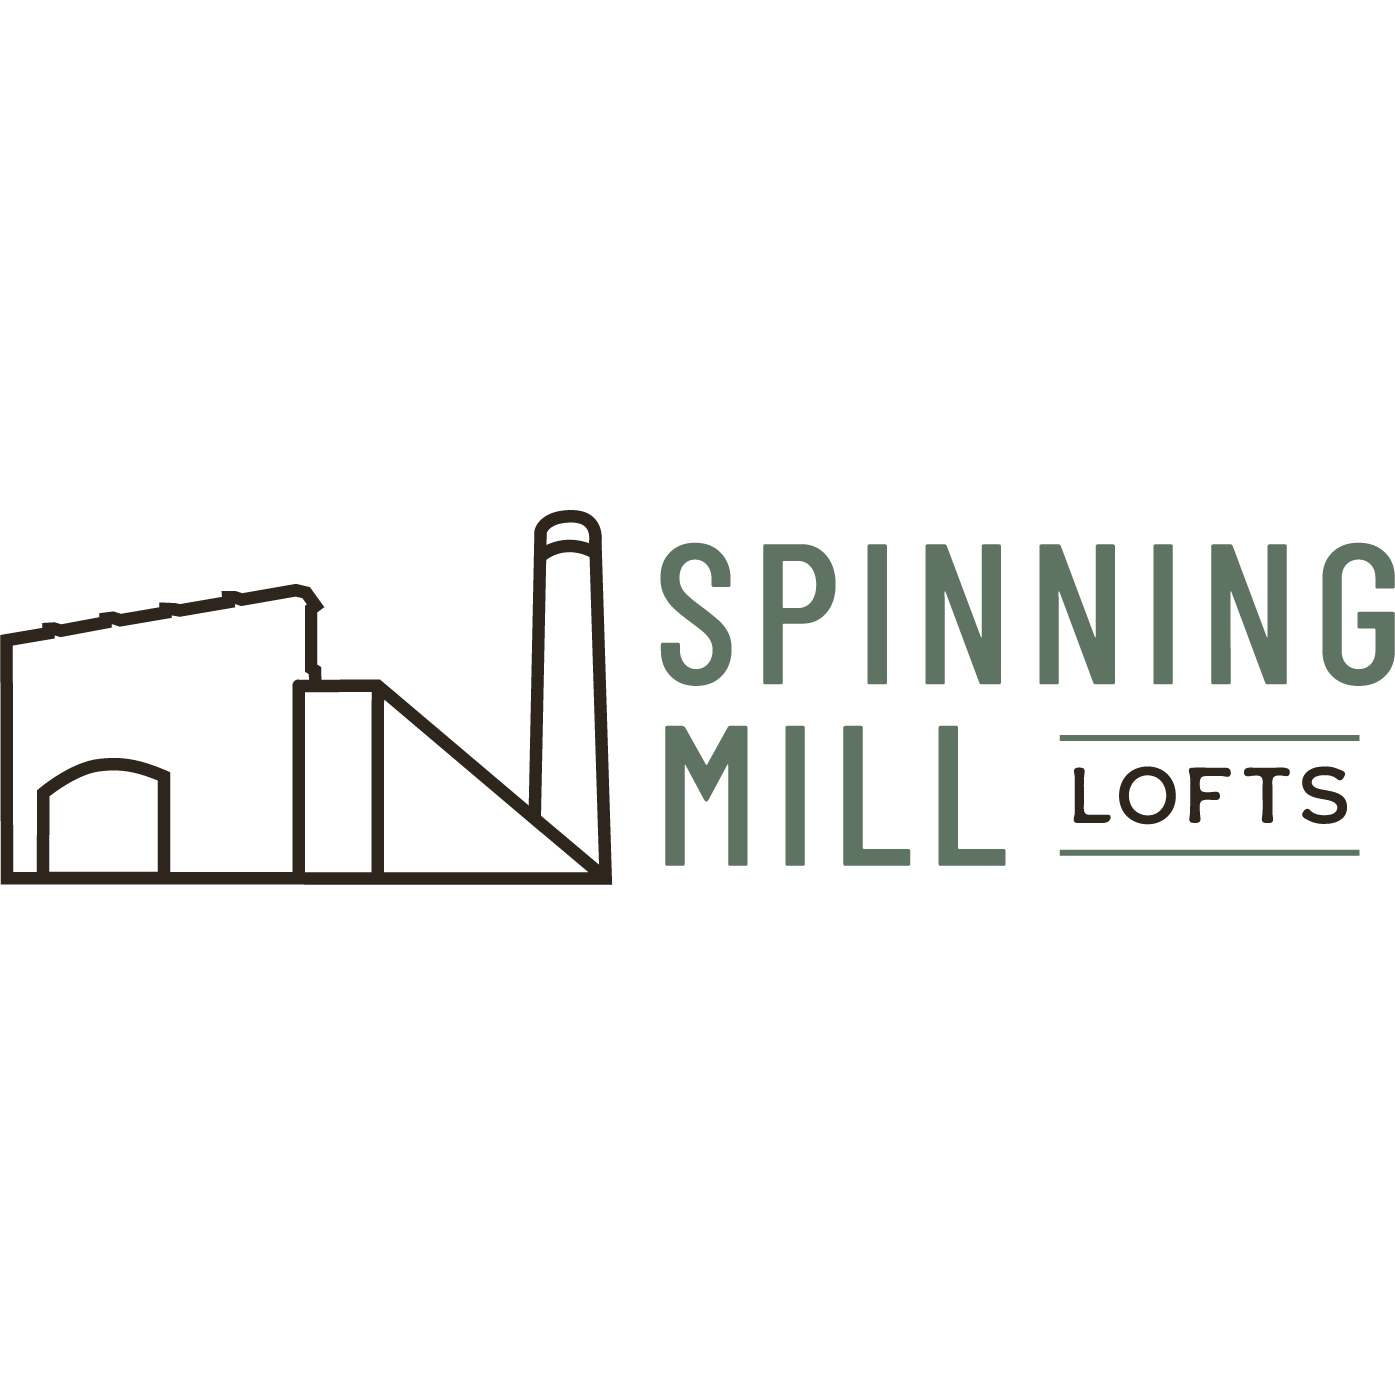 Spinning Mill Lofts - Clayton, NC 27520 - (833)271-2365 | ShowMeLocal.com